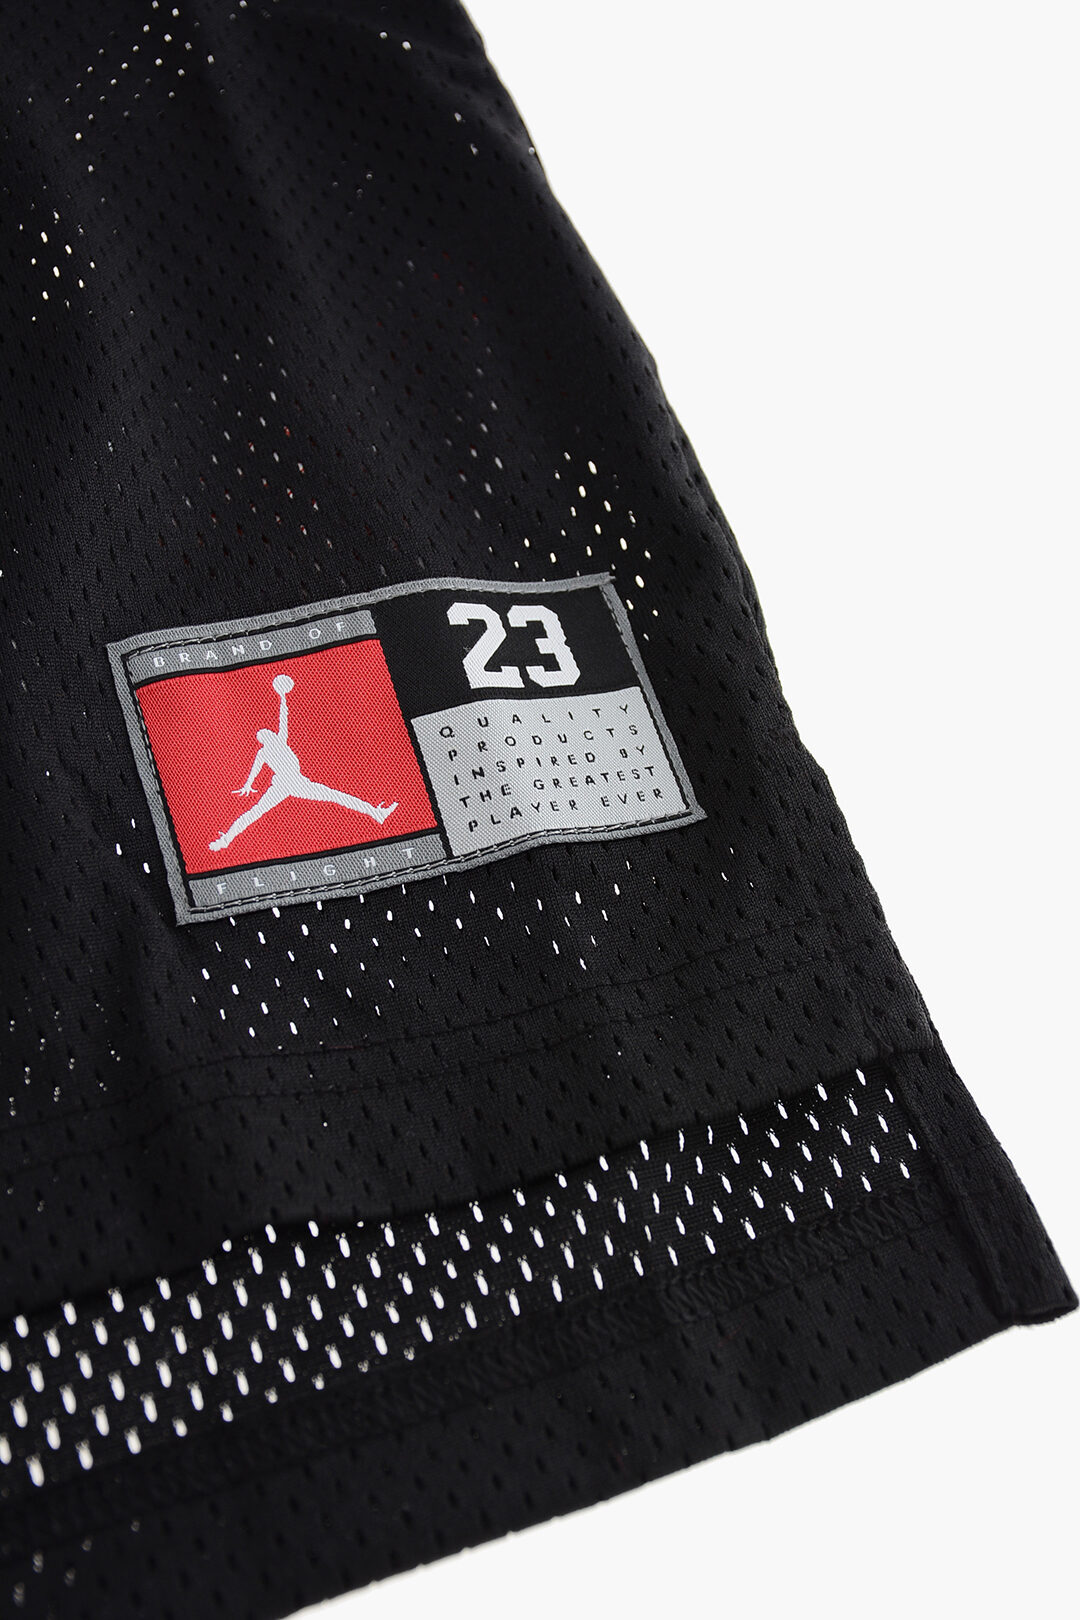 Nike KIDS AIR JORDAN Perforated 23 Tank Top With Maxi Frontal Embroidery  boys - Glamood Outlet